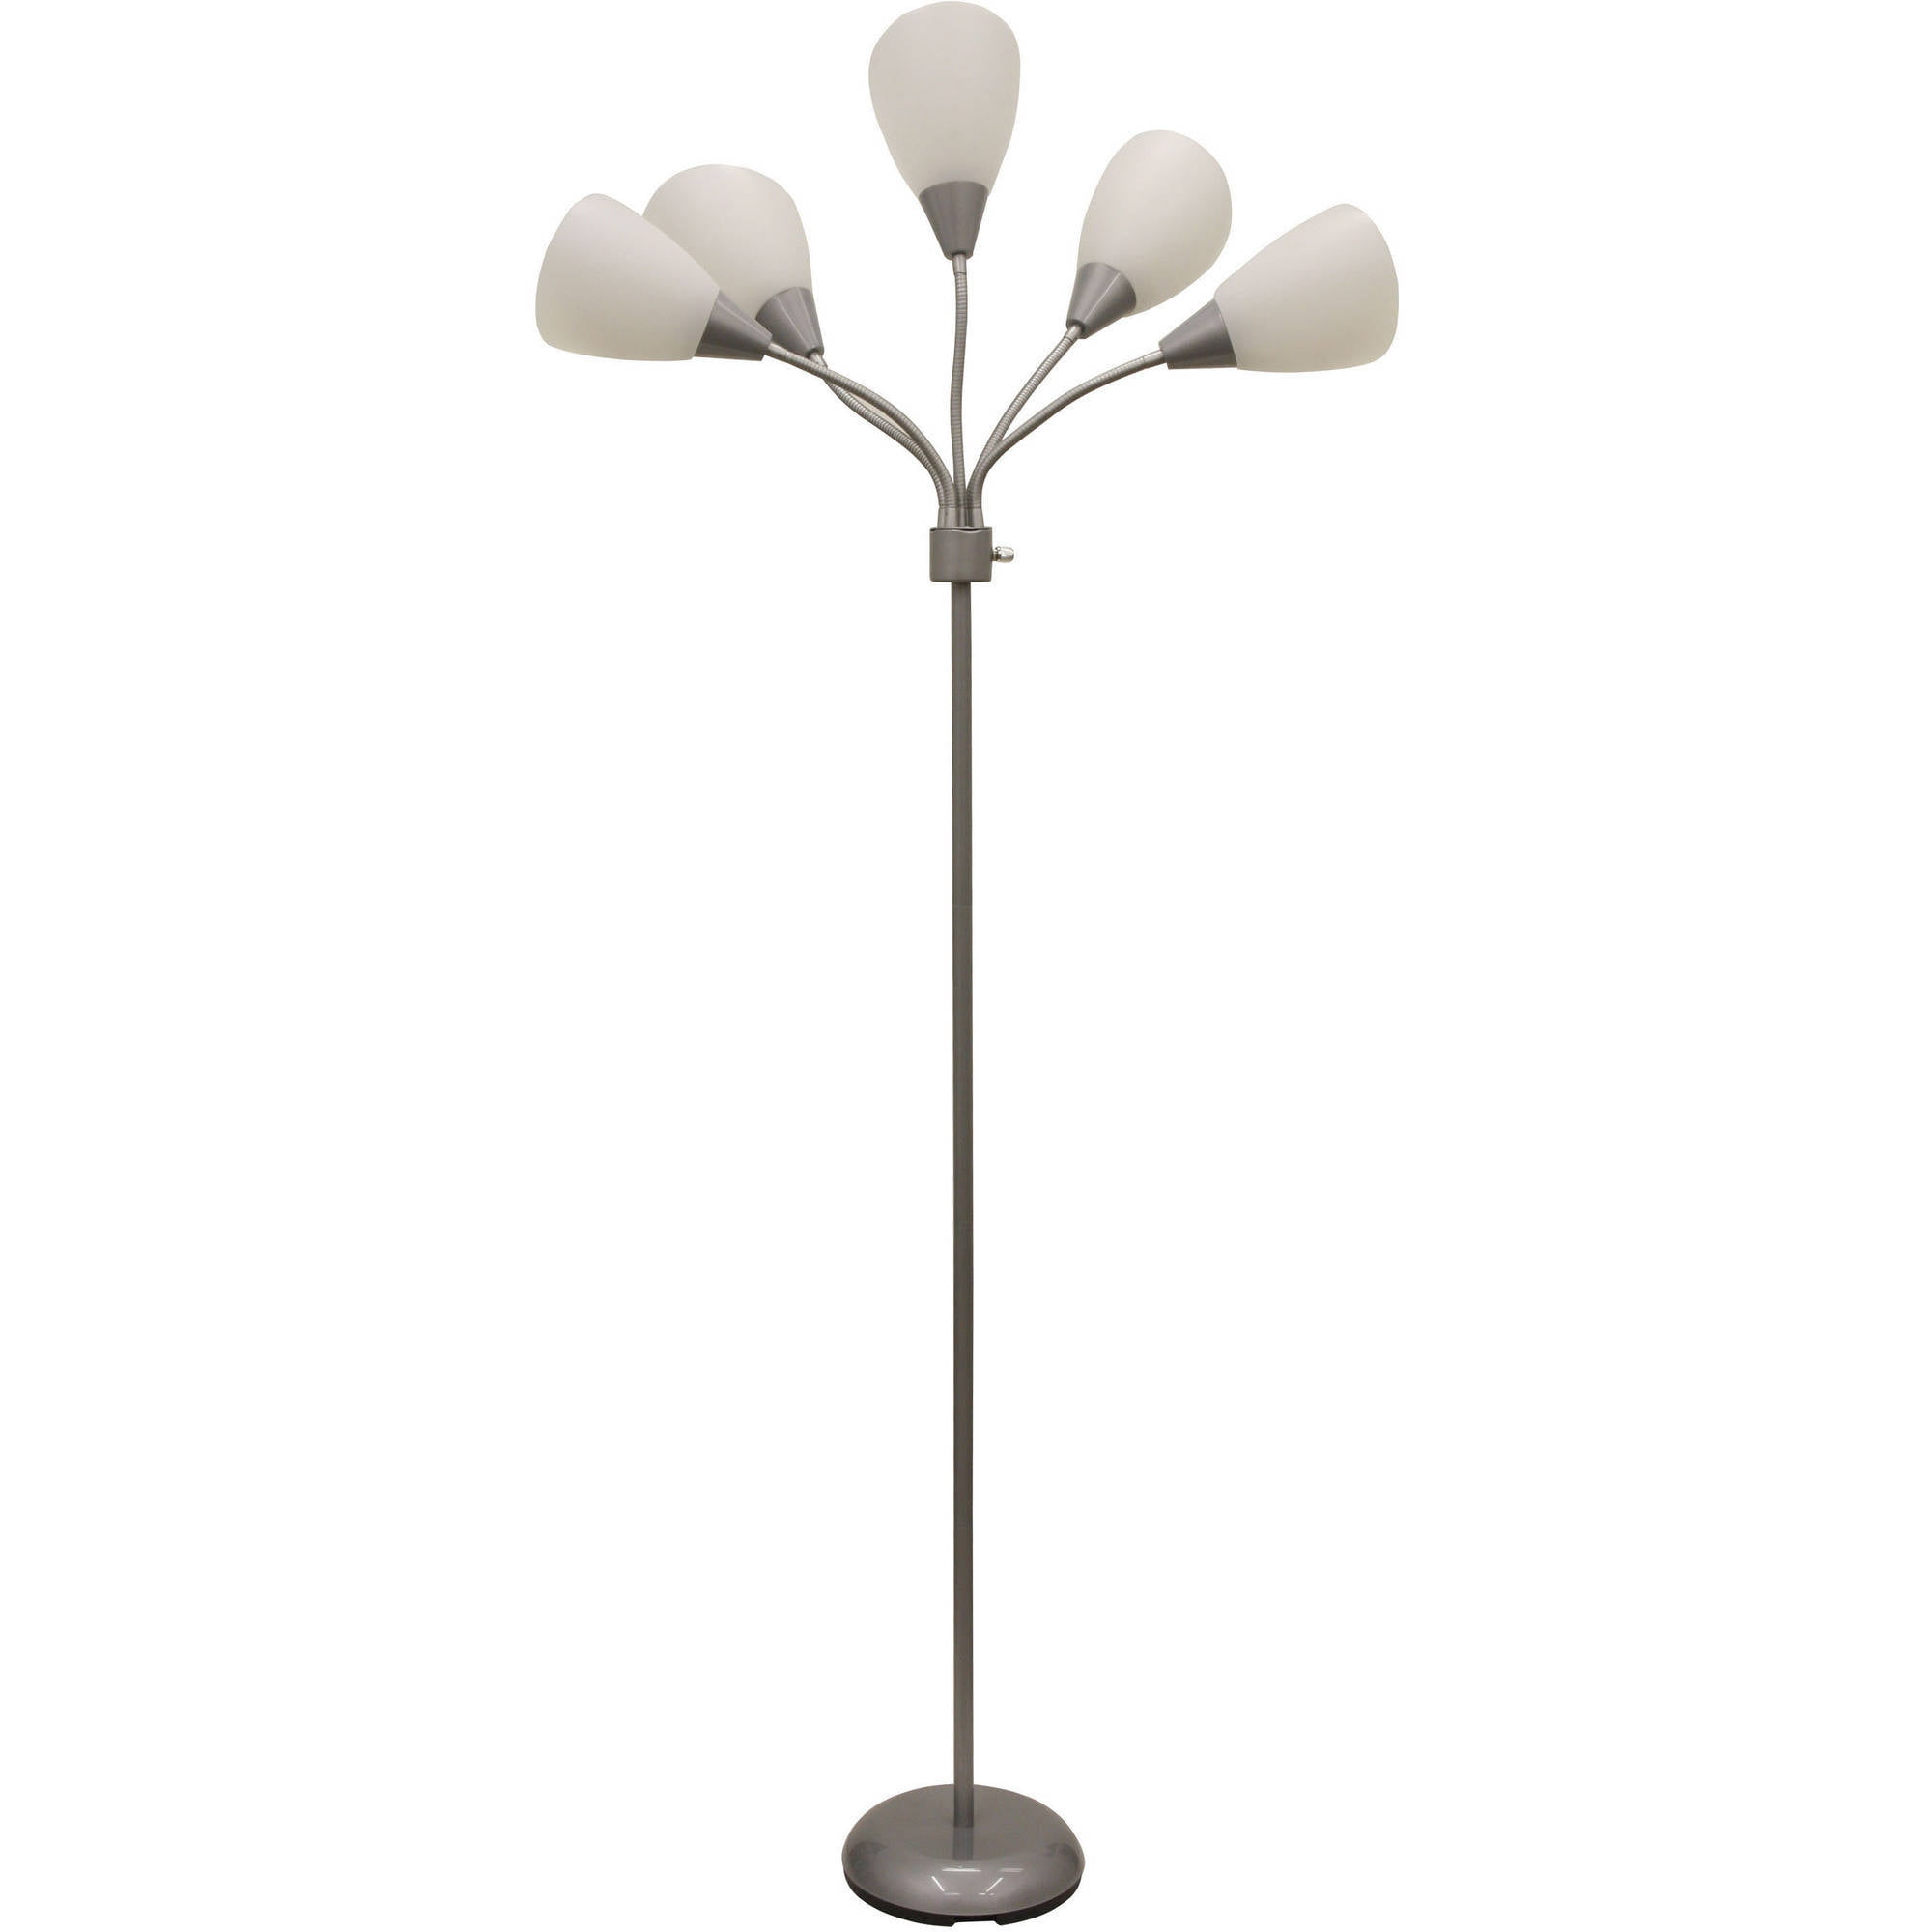 Mainstays 5-Light Multihead Floor Lamp, Silver with White Shade and a